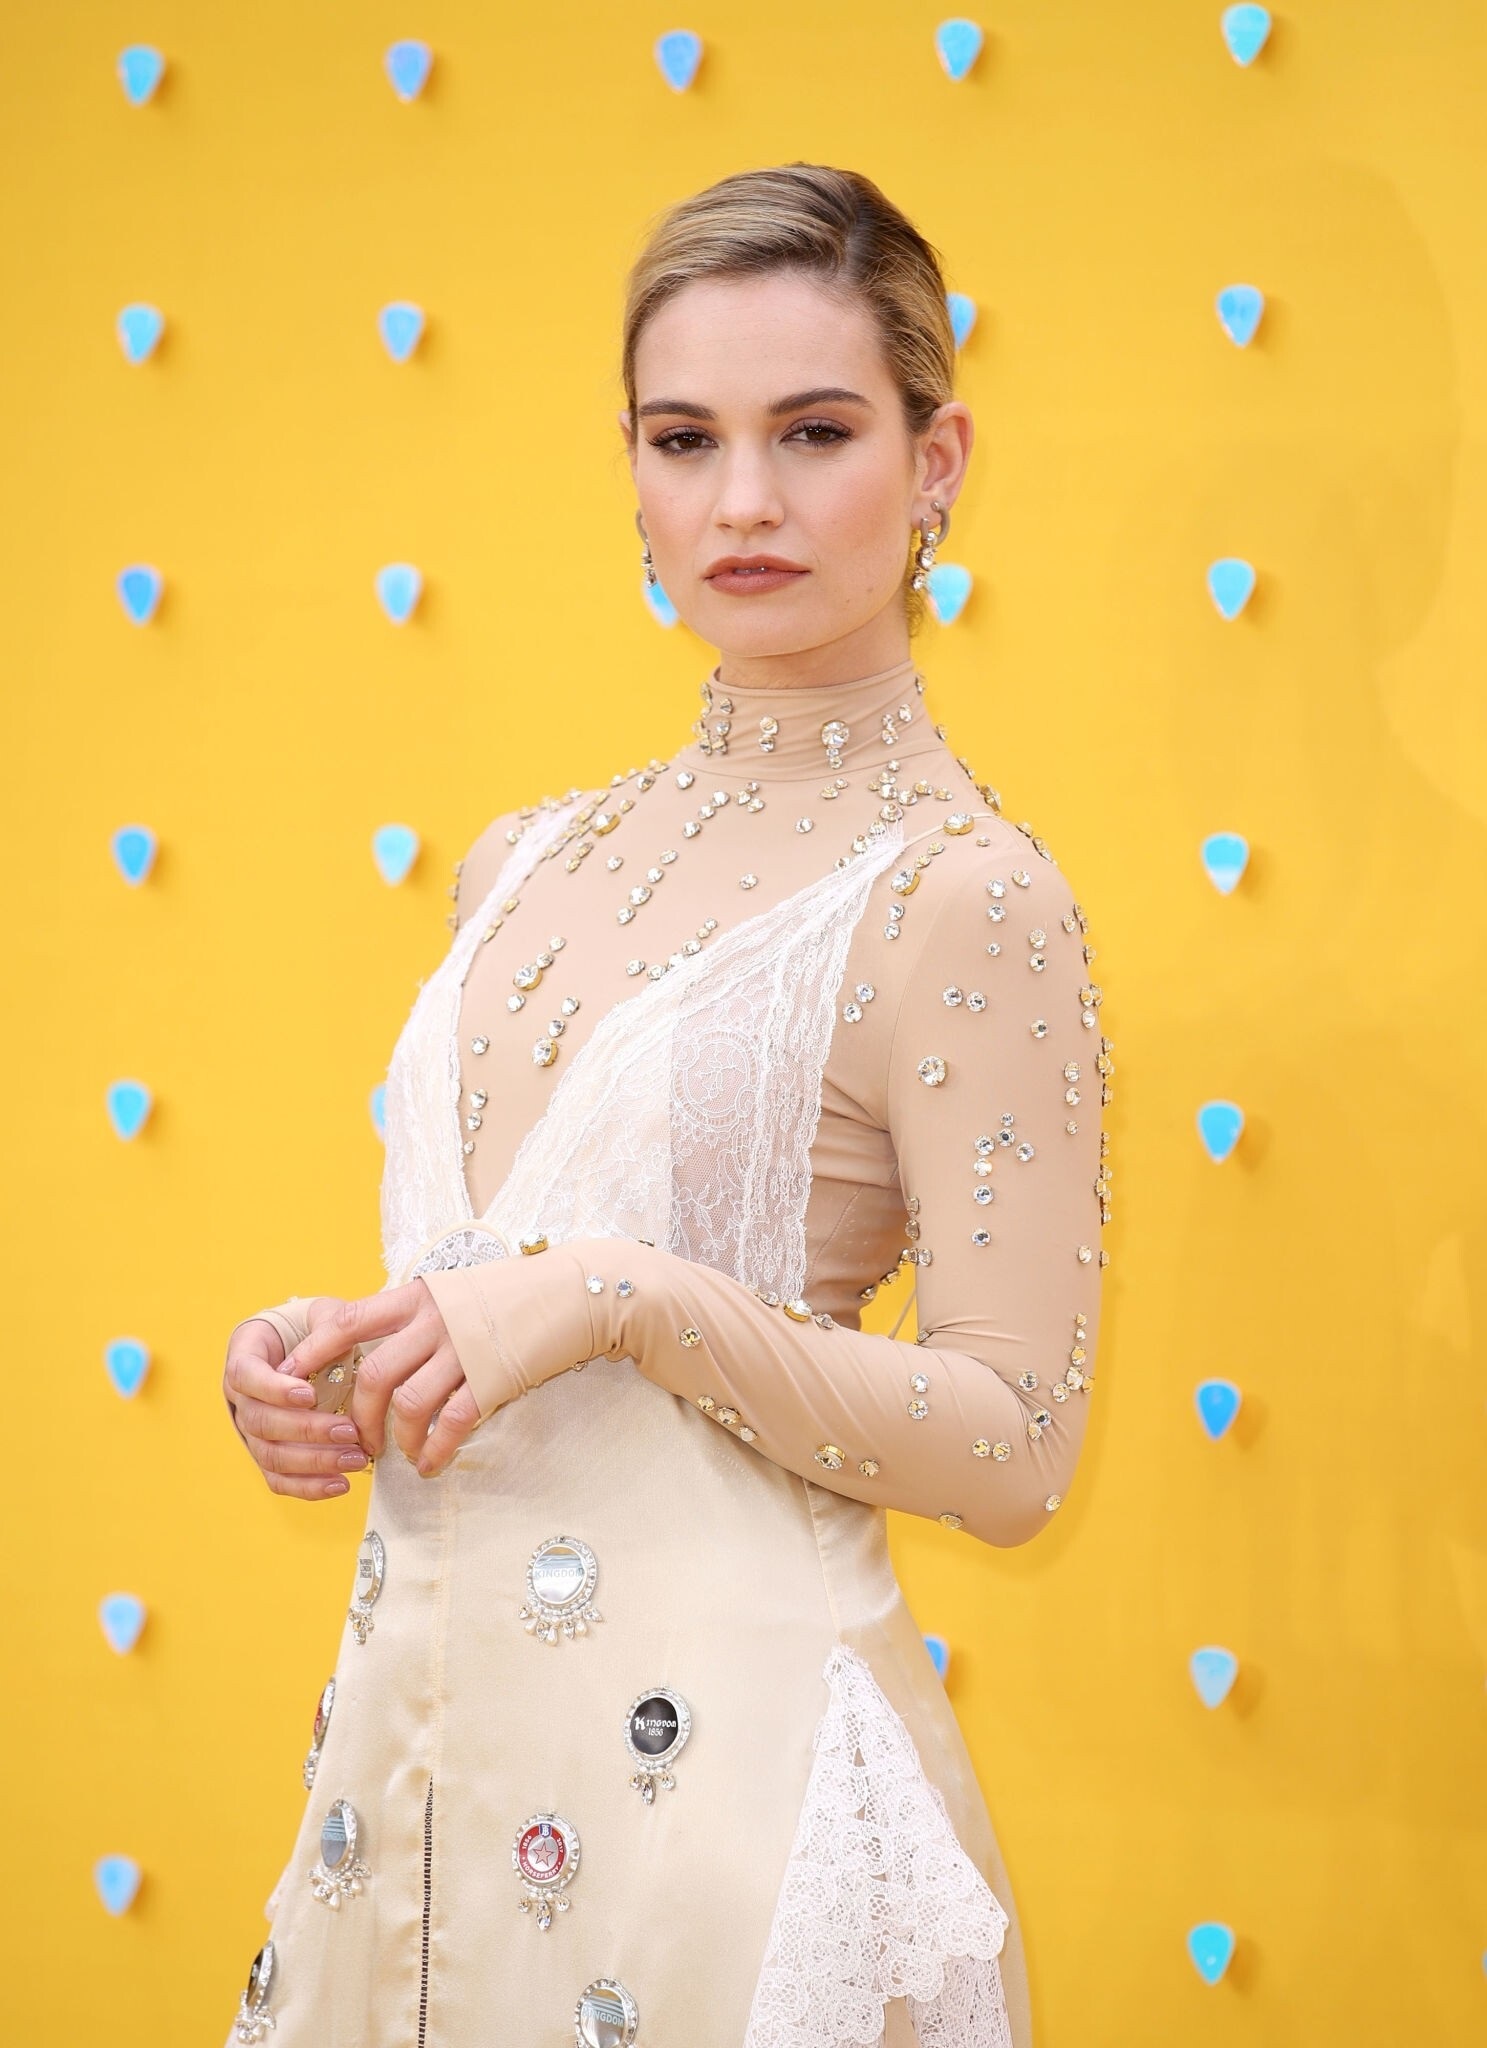 Lily James At The Premiere Of Yesterday In London